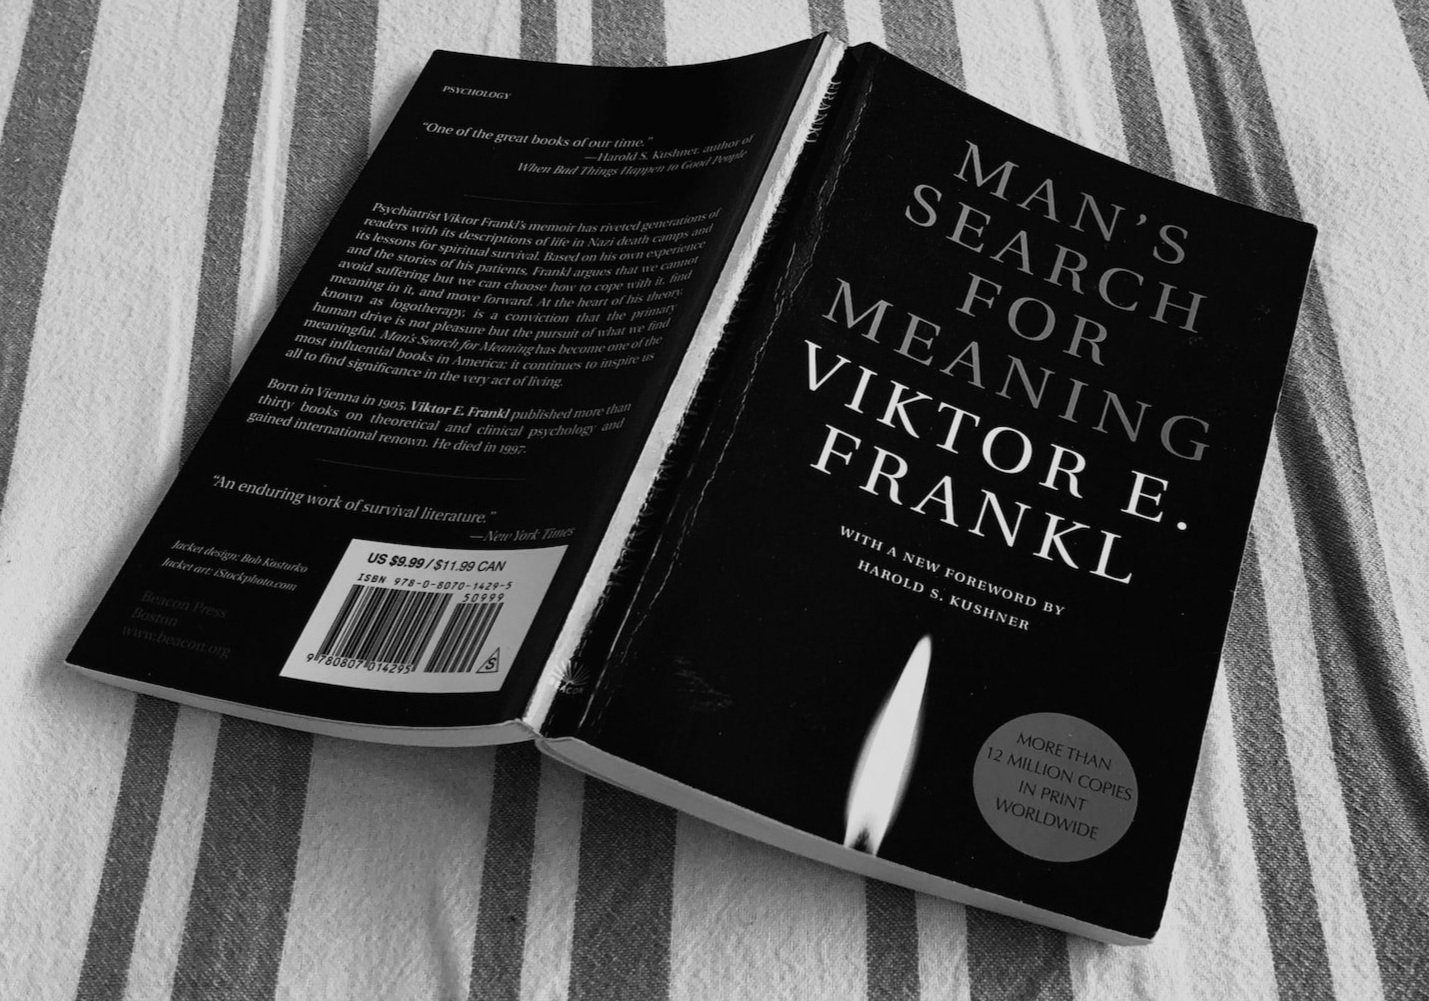 Vicktor Frankl's book Man's Seach For Meaning